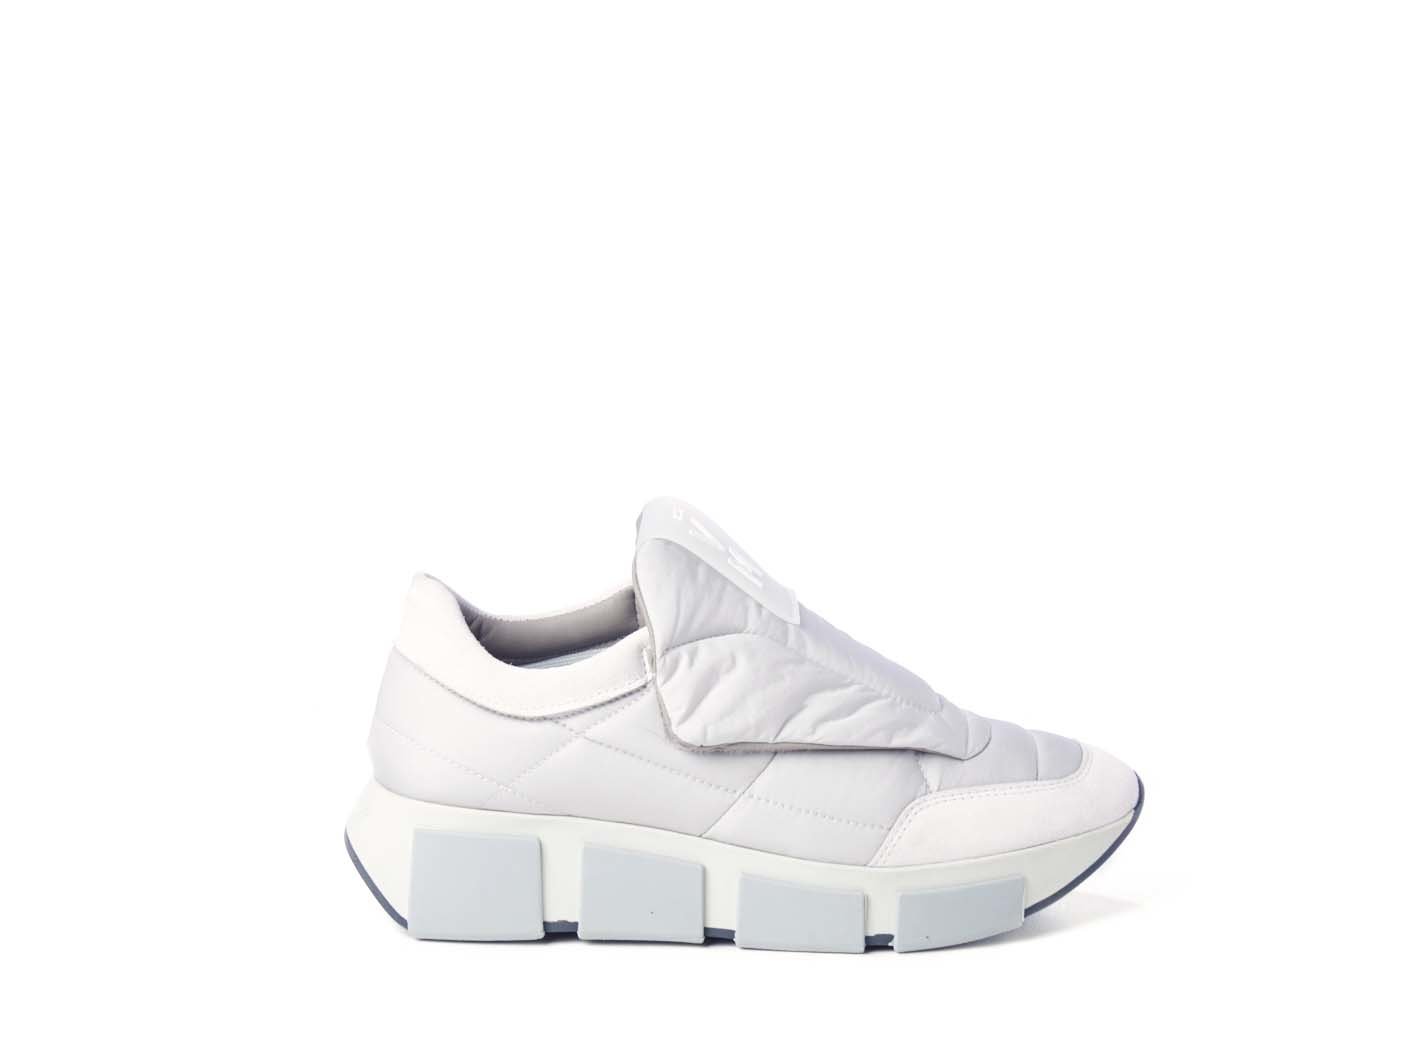 white quilted shoes